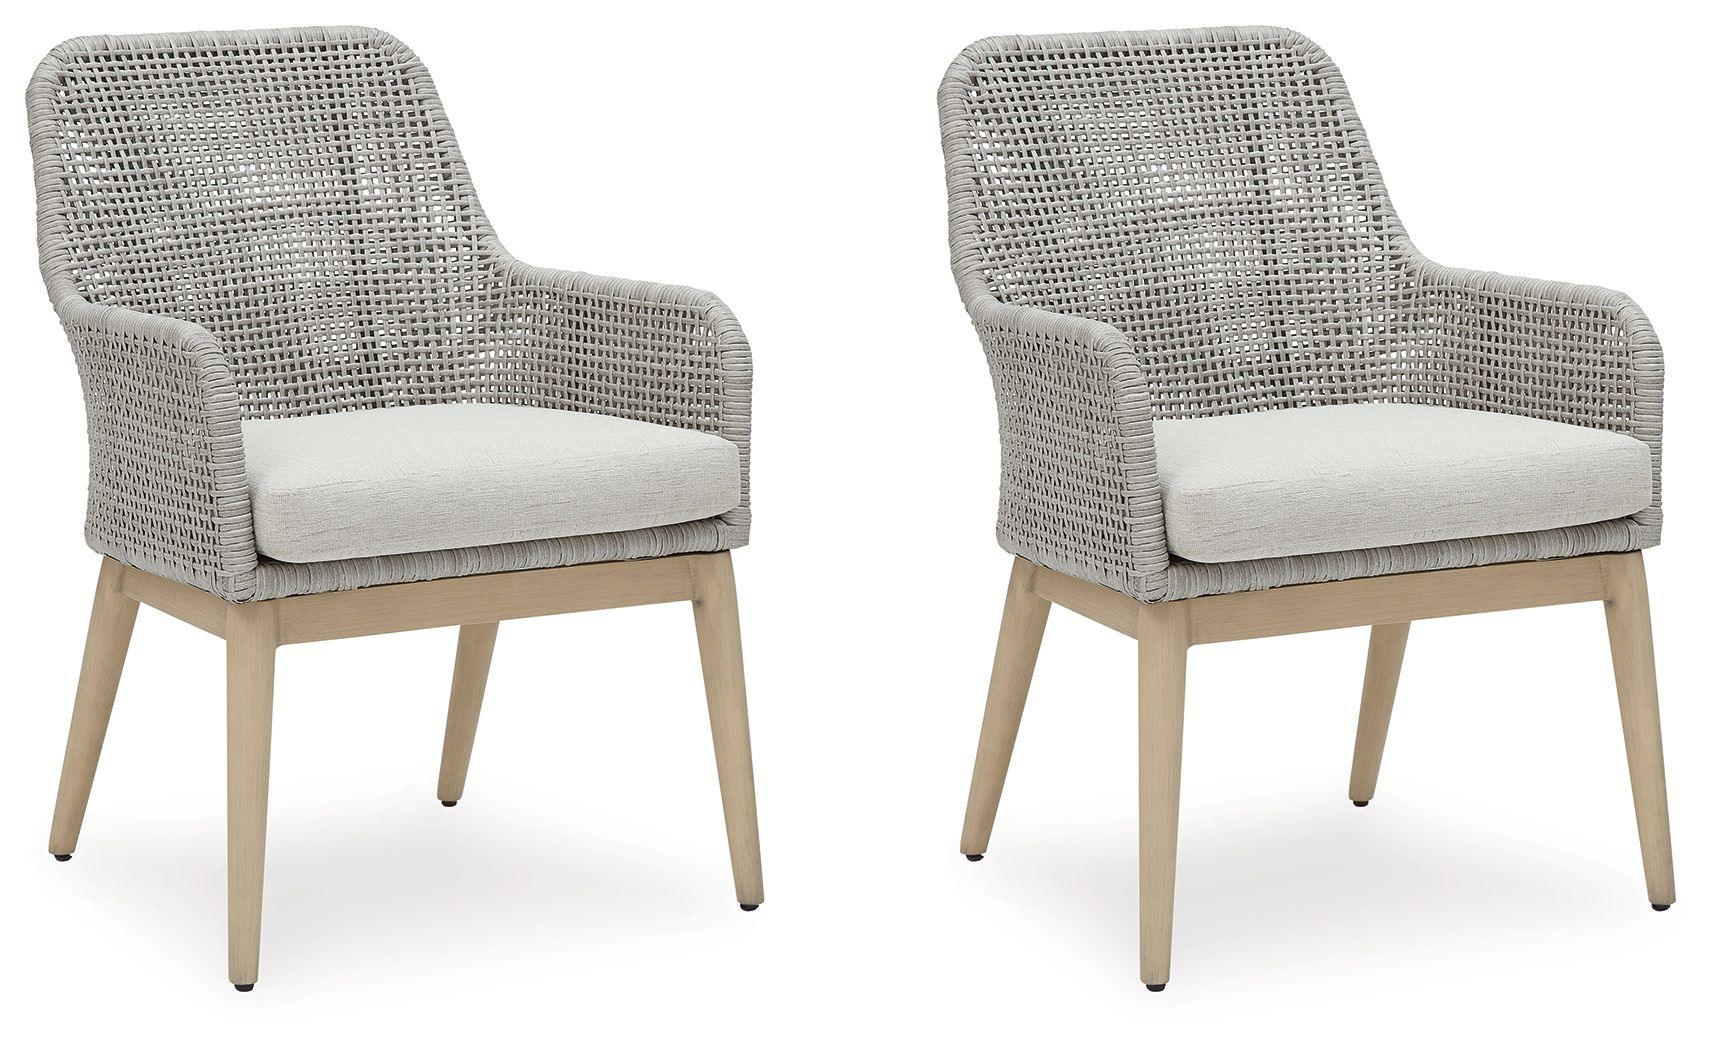 Signature Design by Ashley® - Seton Creek - Gray - Arm Chair With Cushion (Set of 2) - 5th Avenue Furniture